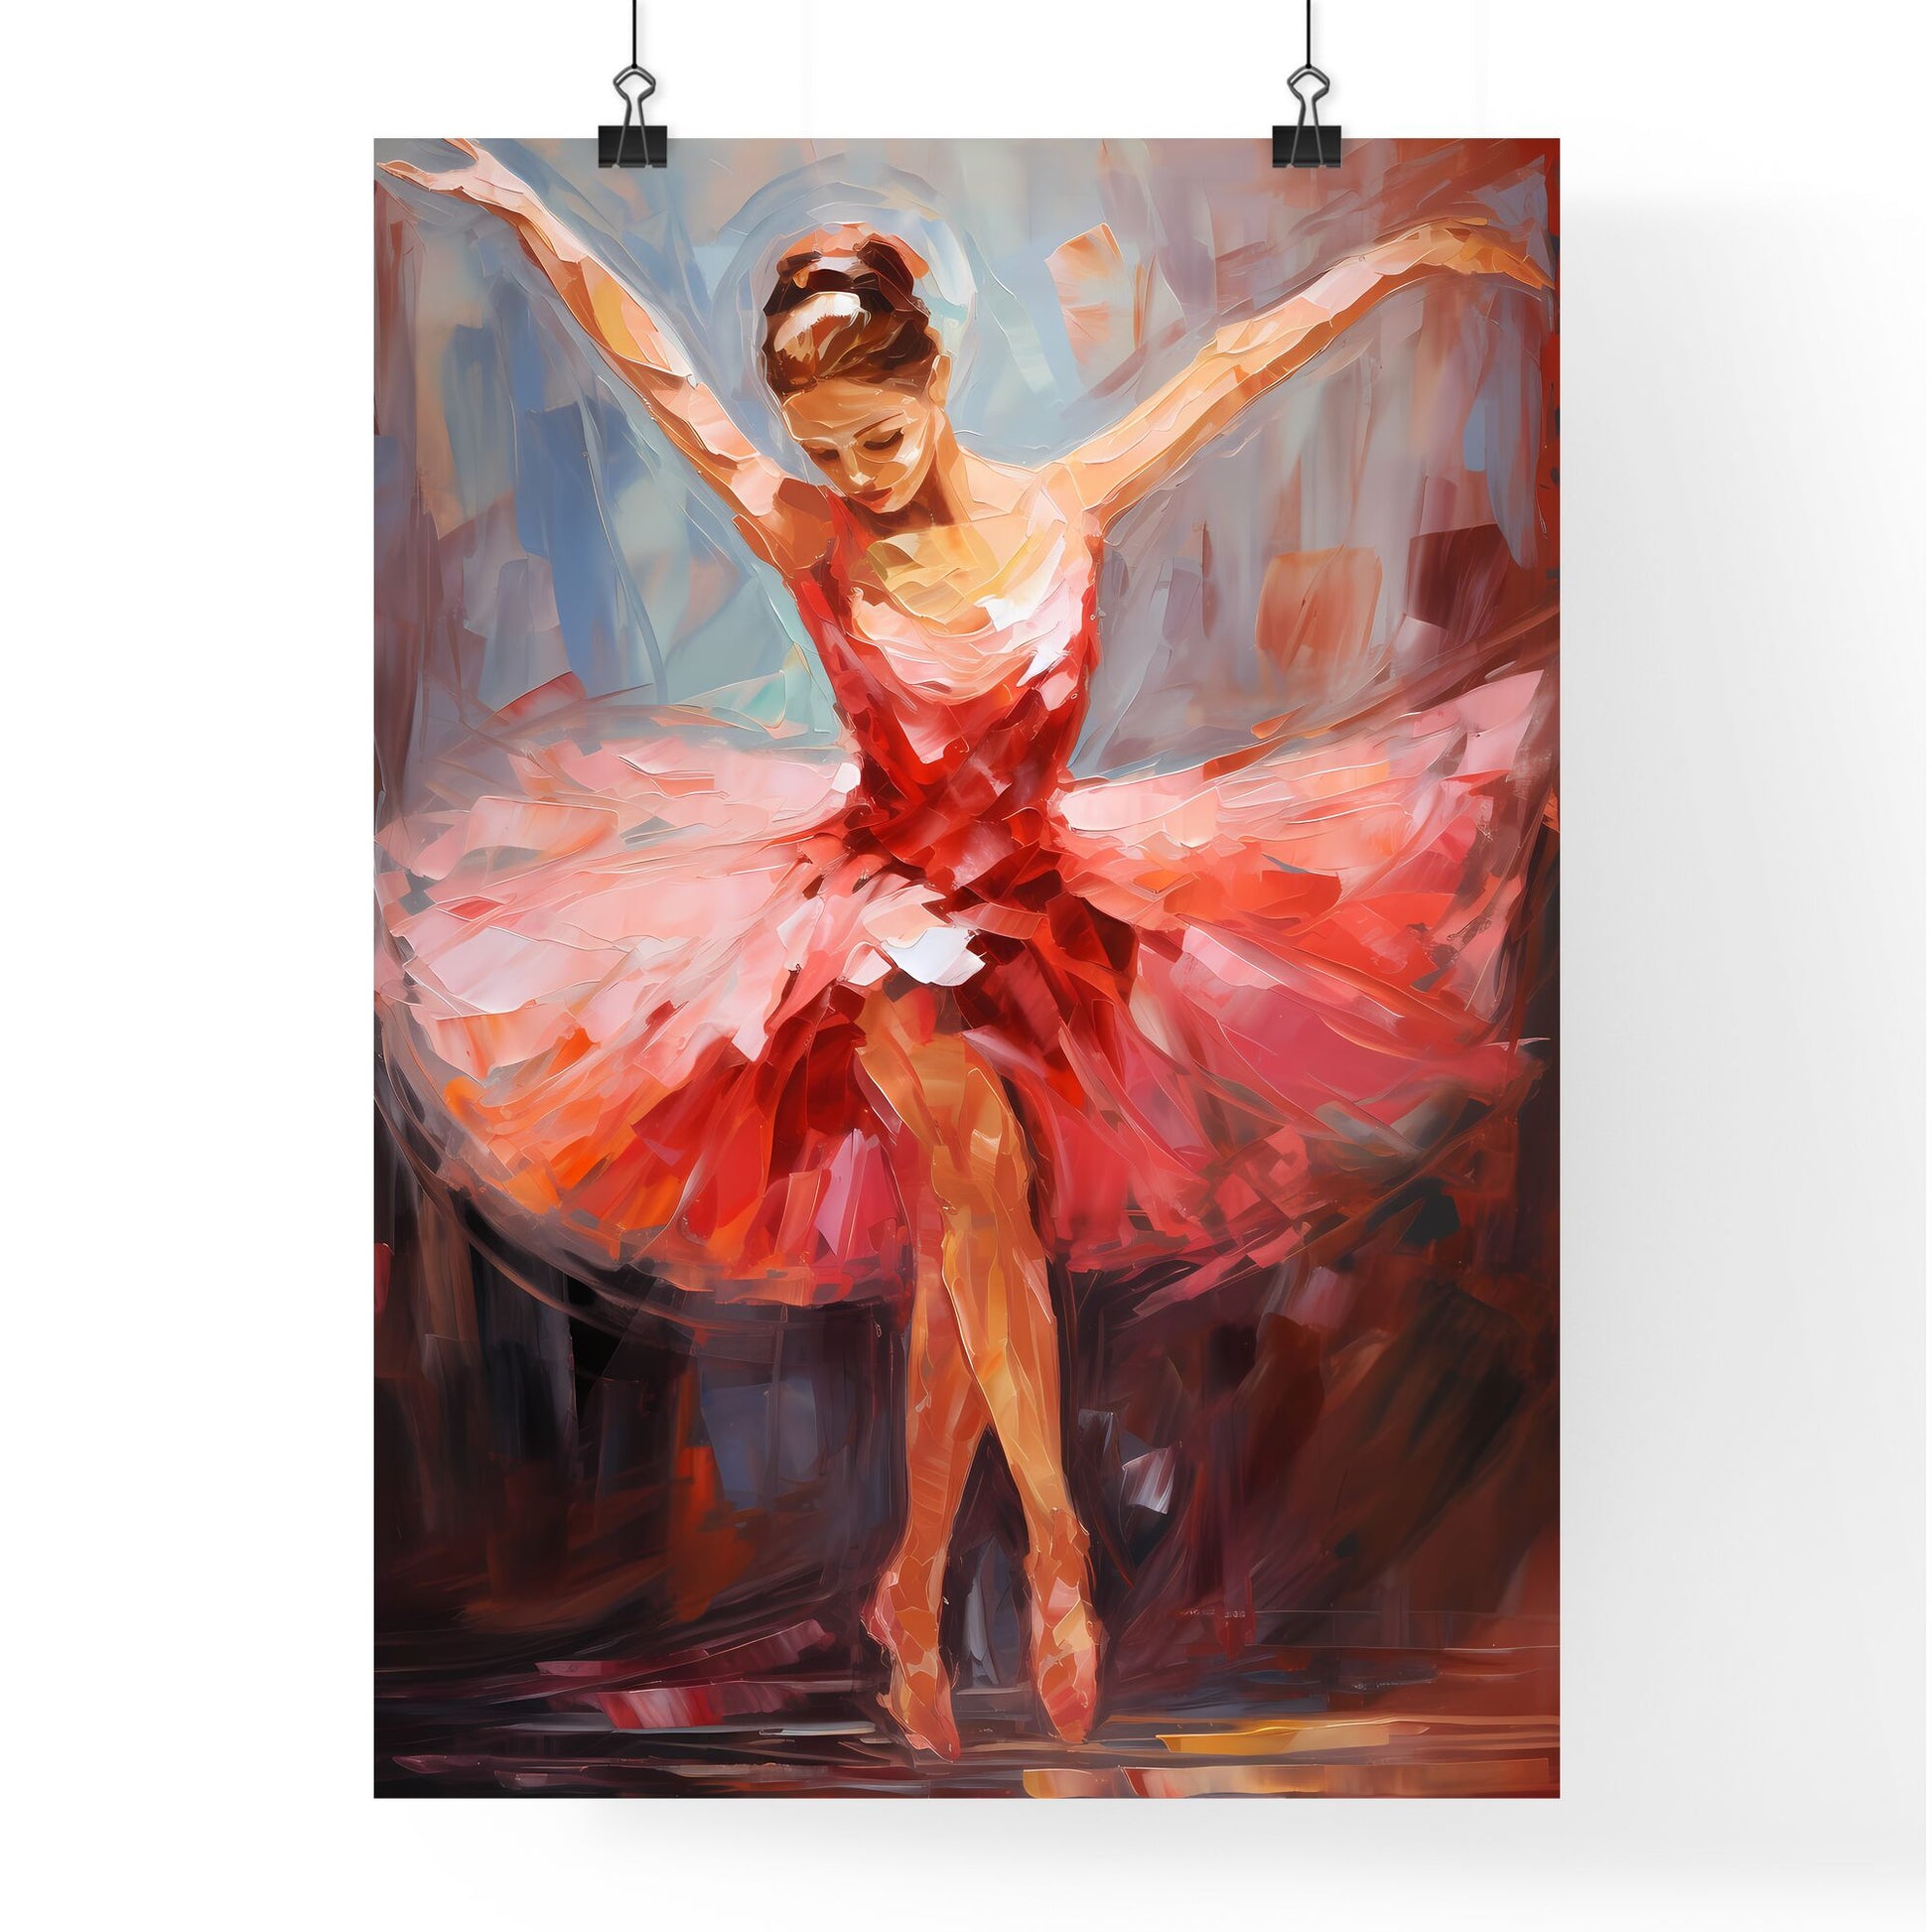 Hand Drawing Picture With Red Ballet Dancer - A Painting Of A Woman In A Pink Dress Default Title